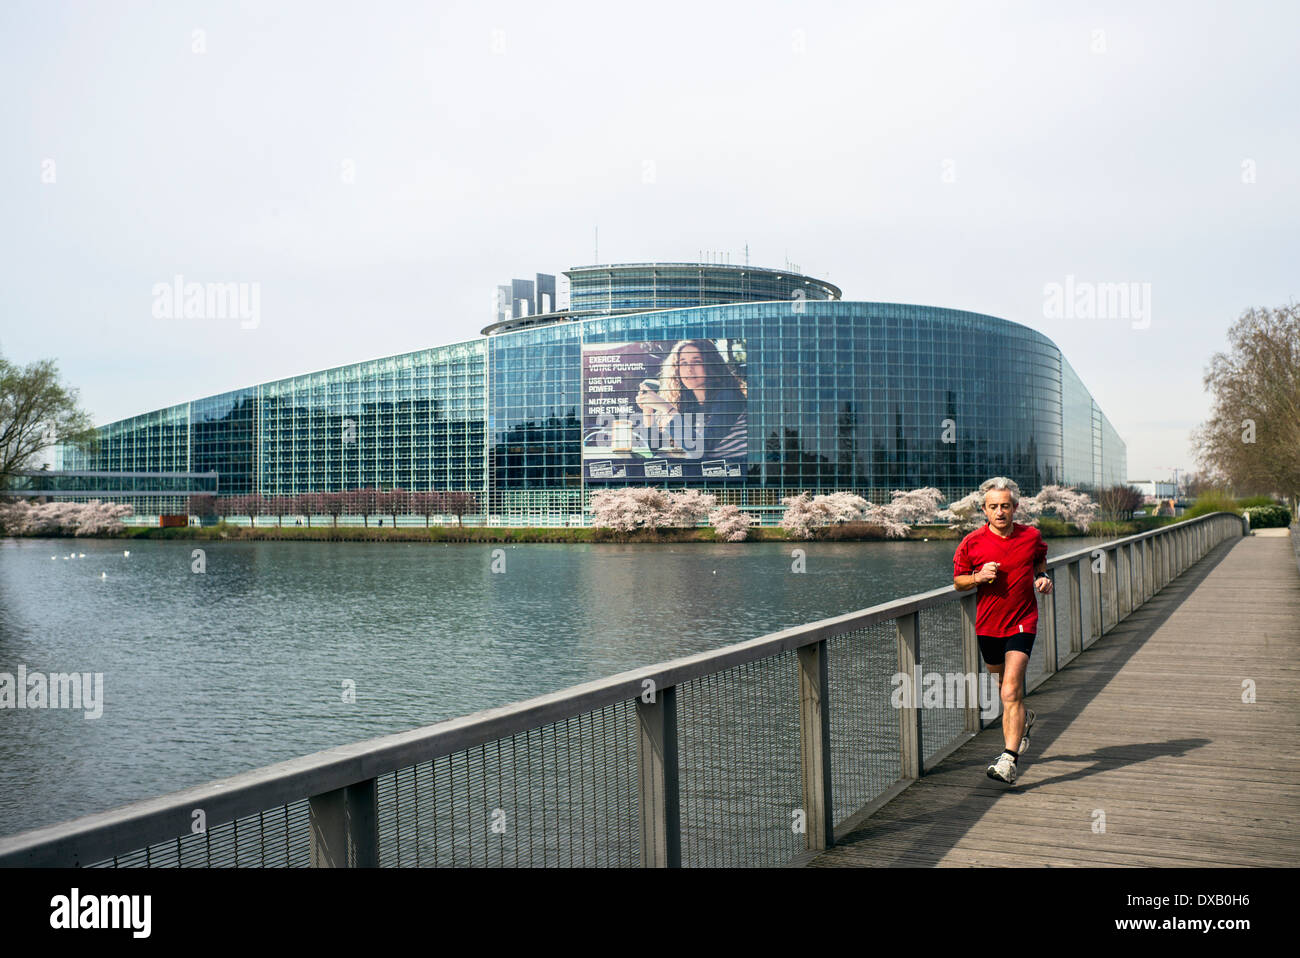 Man jogging, Louise Weiss building with 2014 European elections poster, European Parliament, cherry blossoms, Strasbourg, France Europe Stock Photo